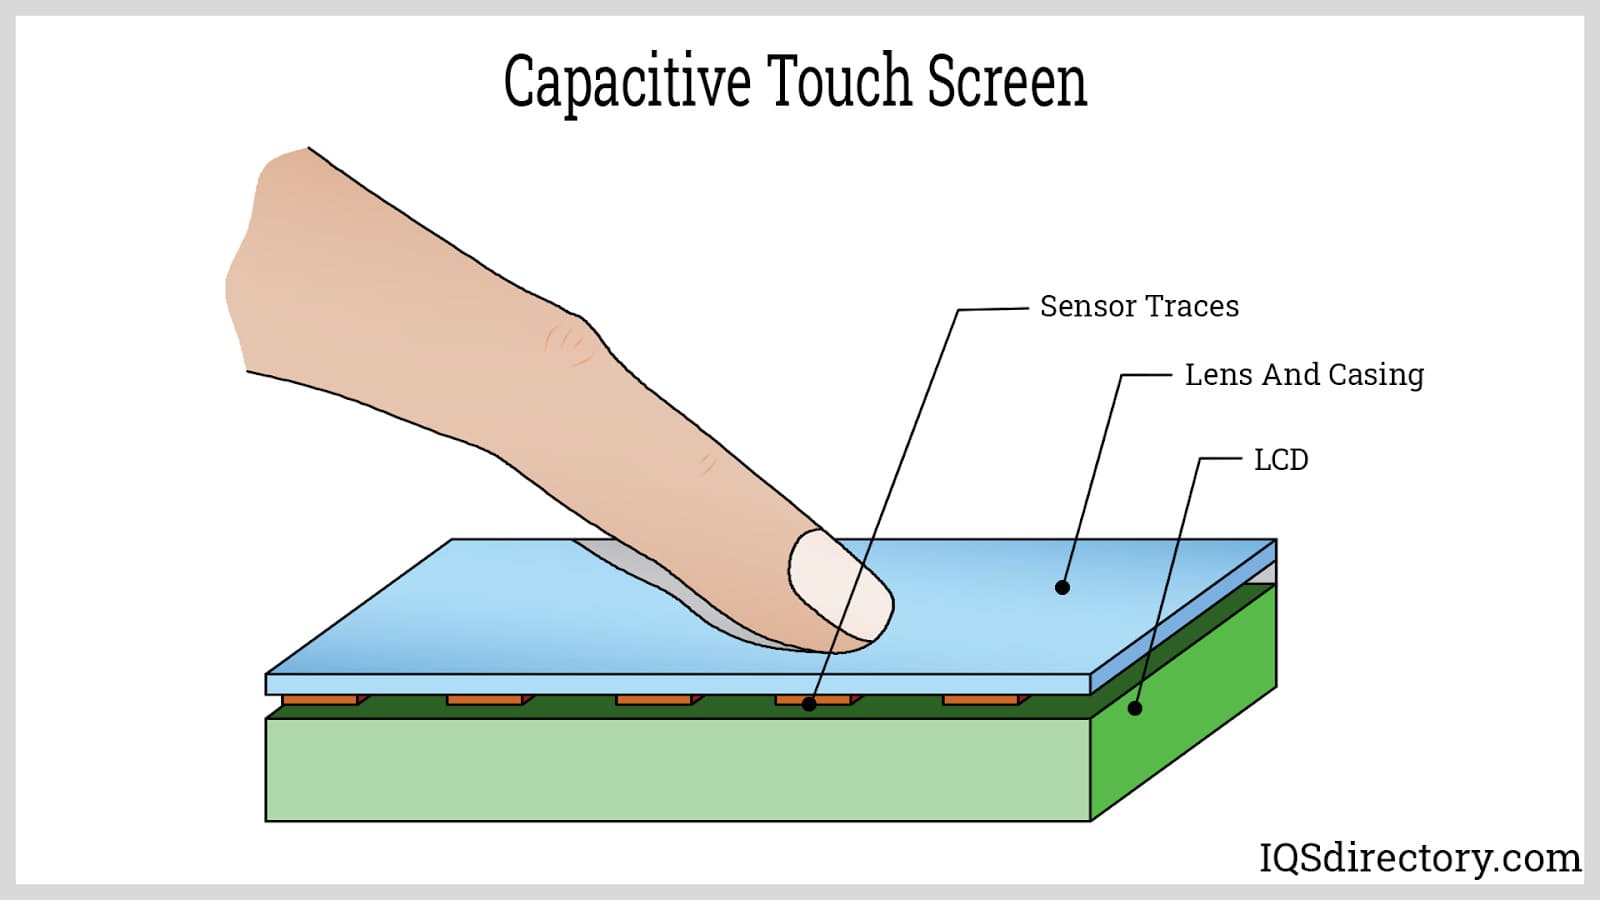 Capacitive Touch Screen